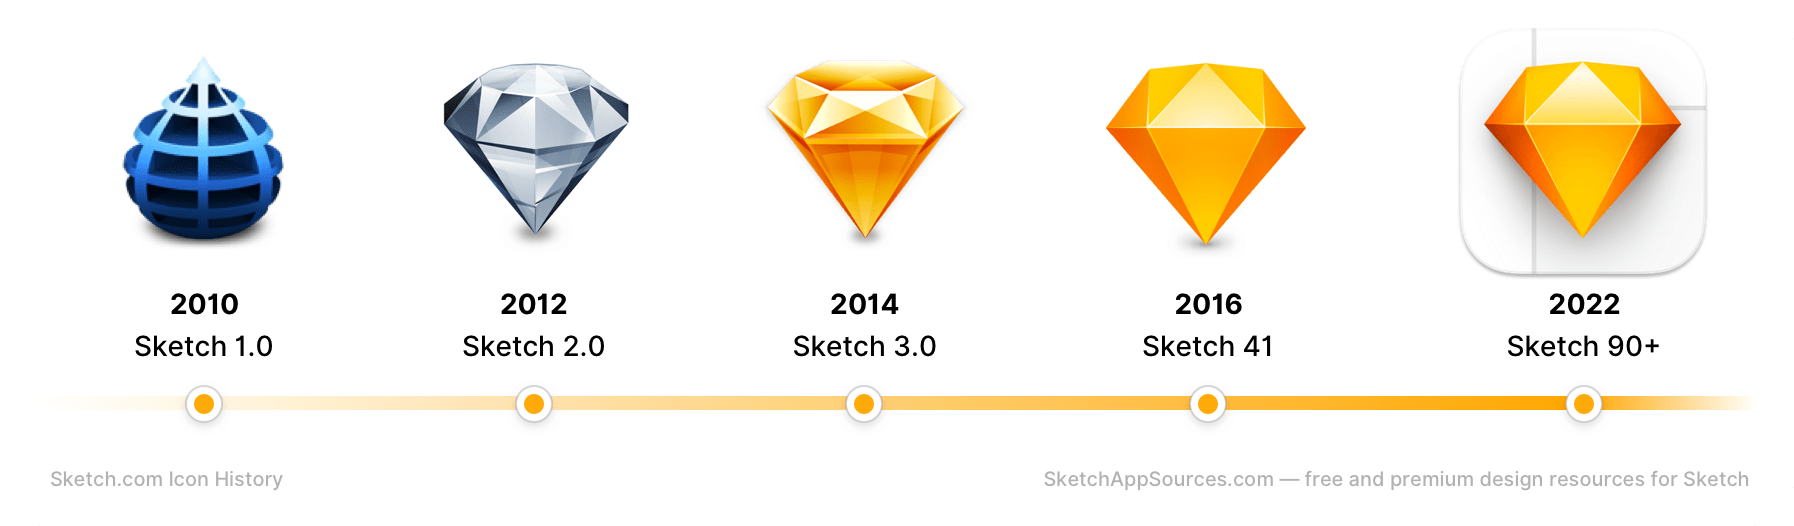 iOS 10/11 App Icon Template PSD/Sketch - Every Interaction